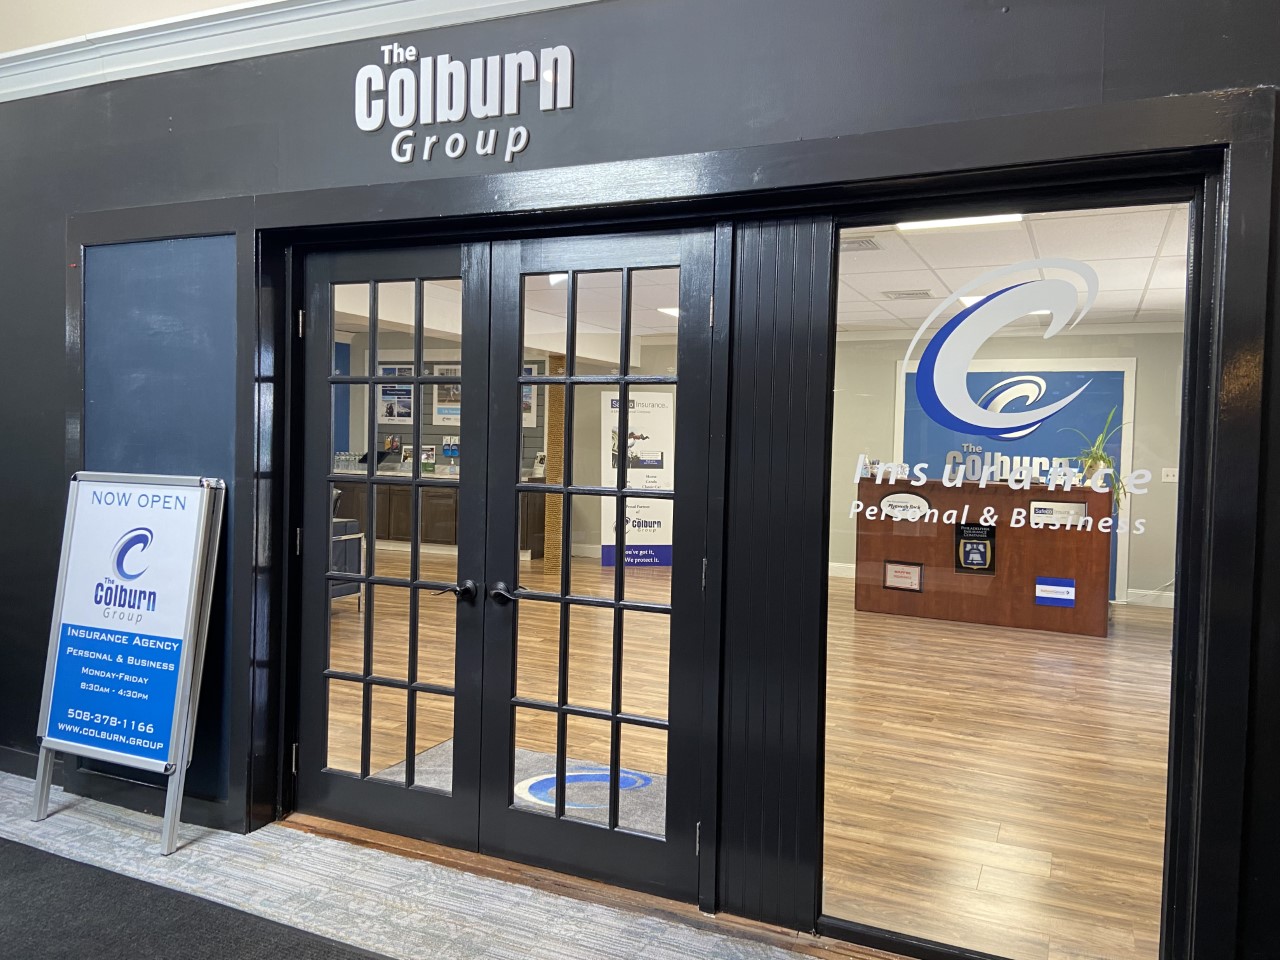 The Colburn Group